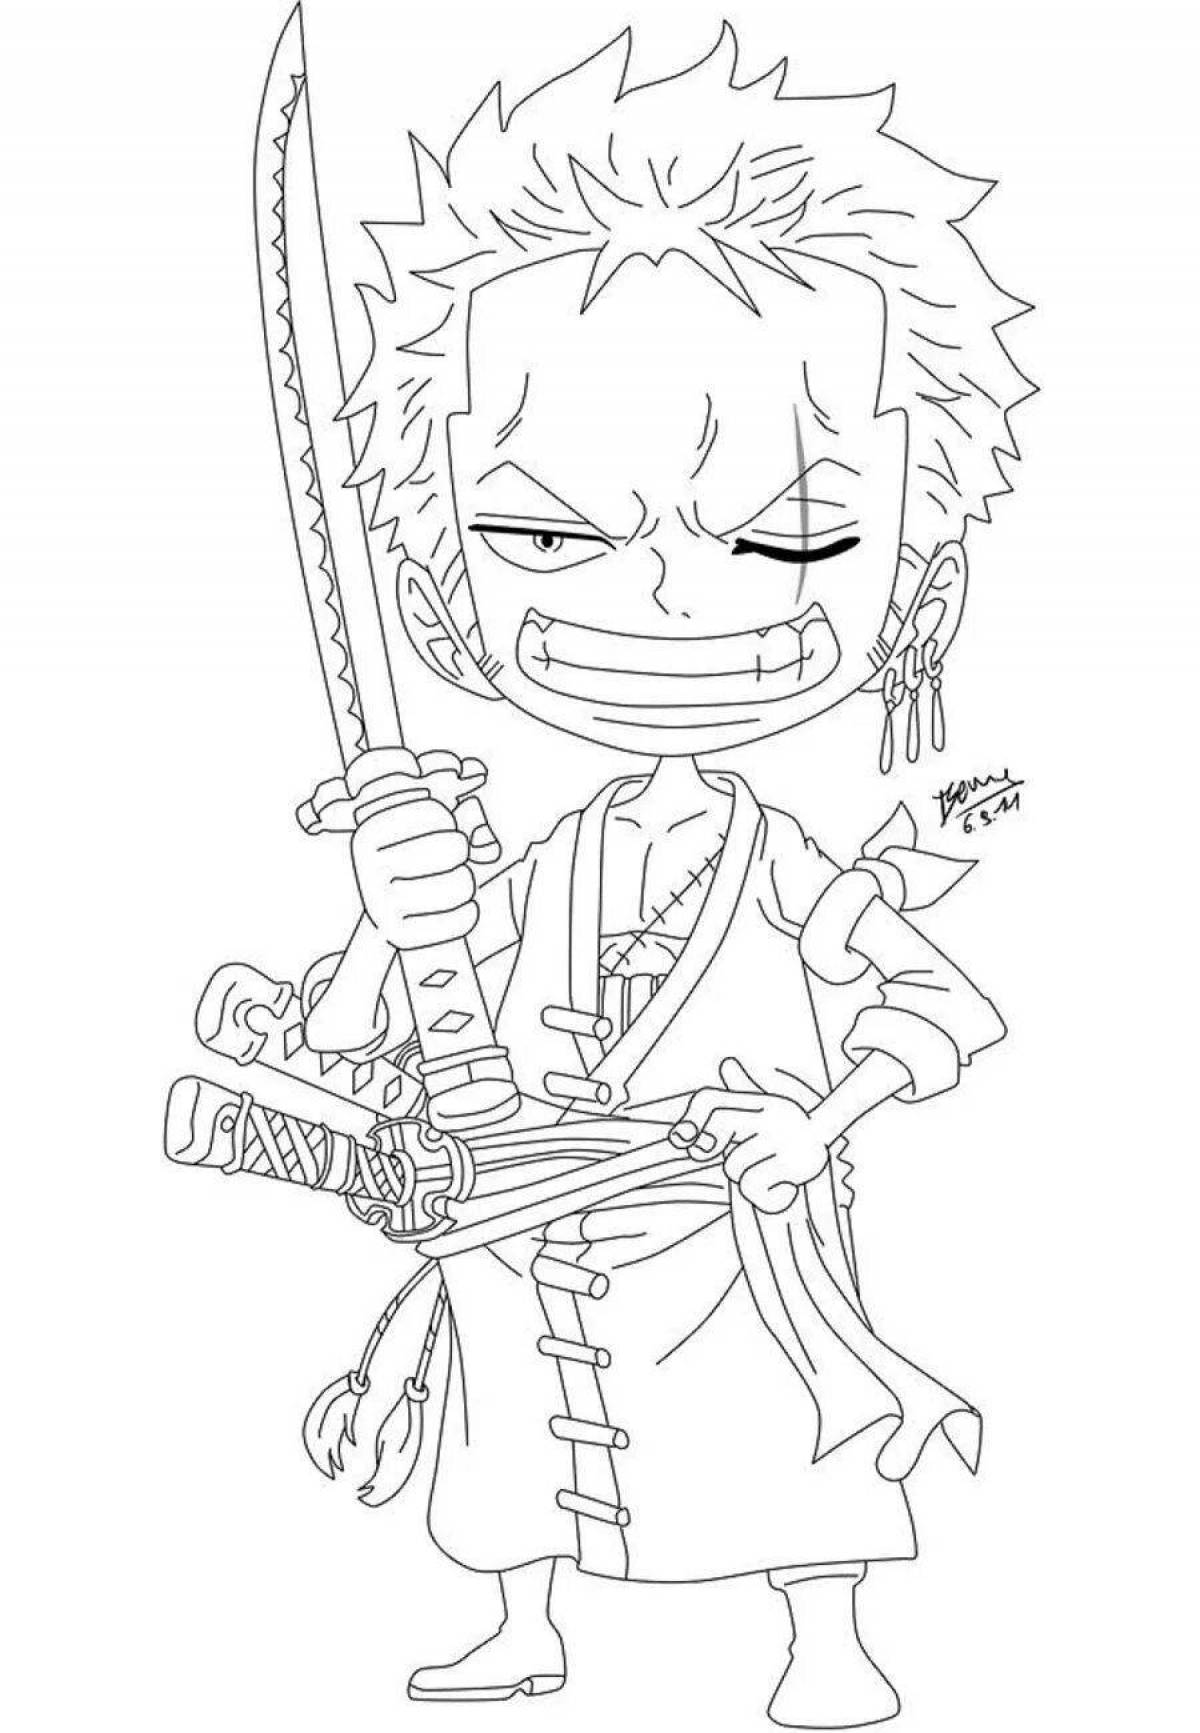 Zoro's exciting coloring book